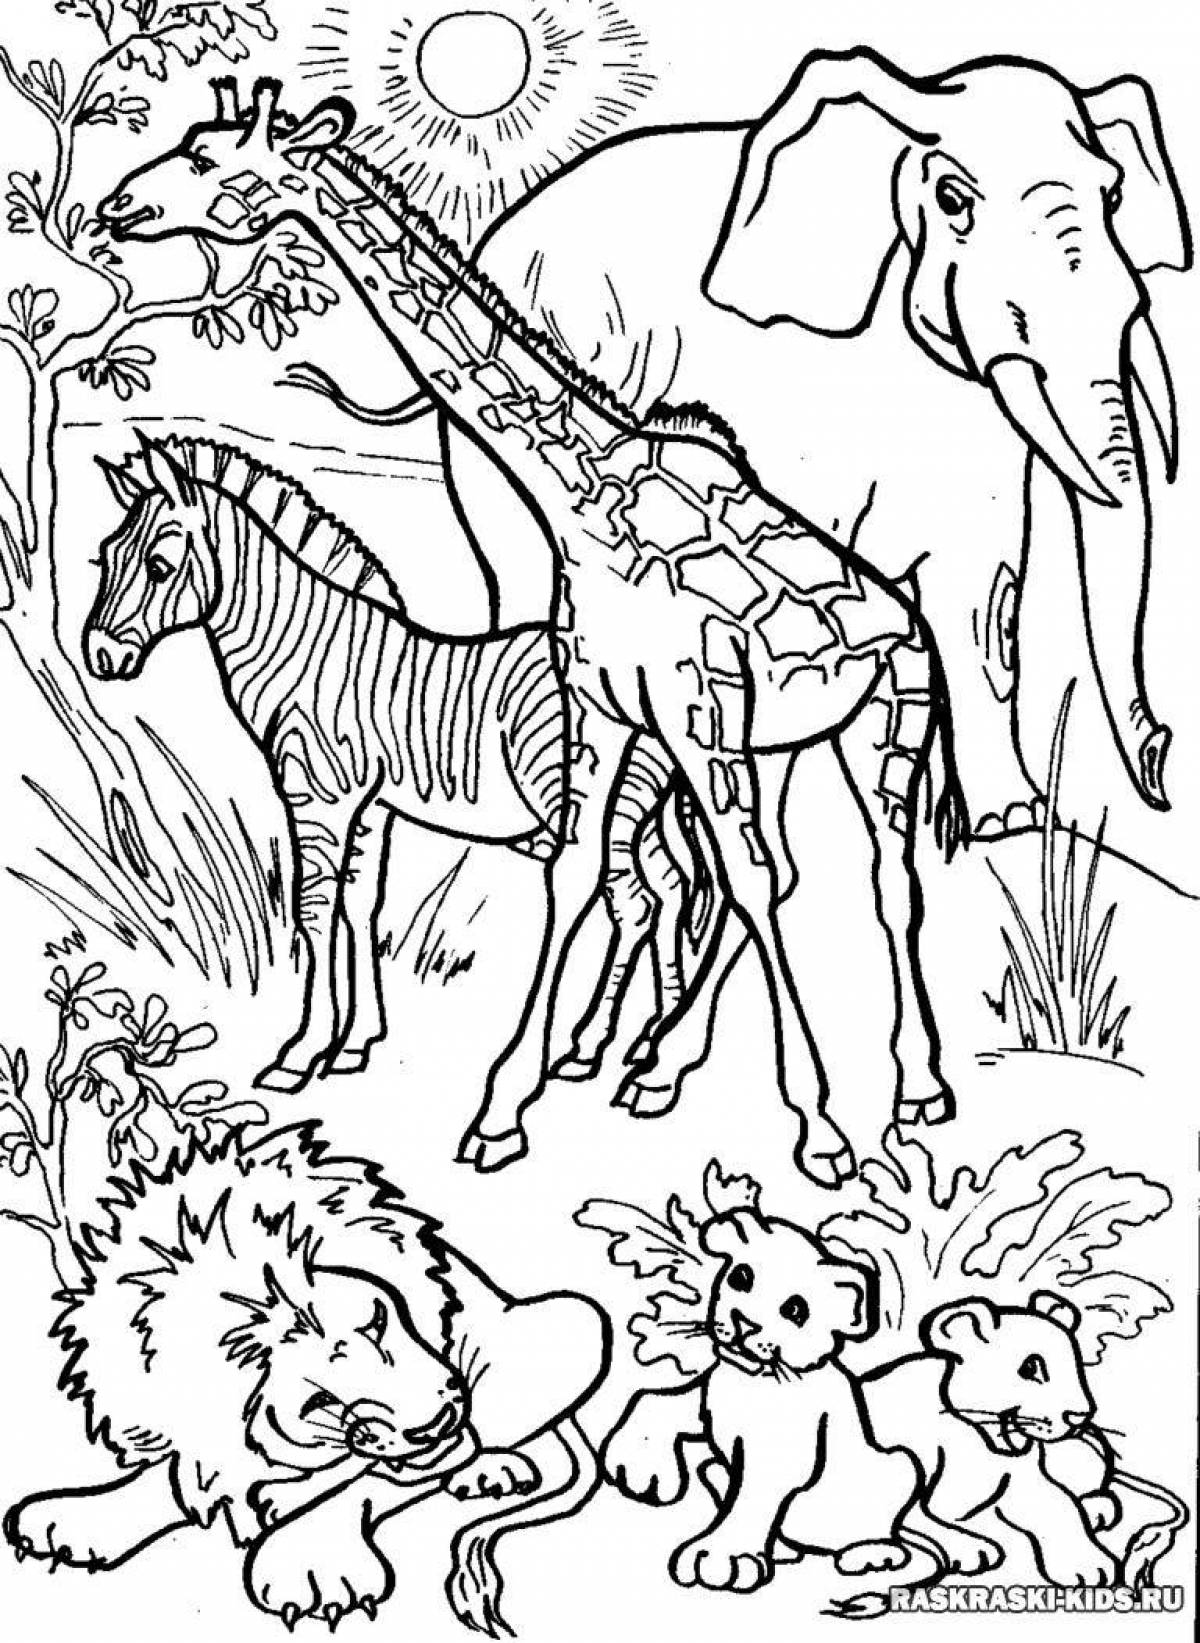 Outstanding wild animal coloring page for 5-6 year olds